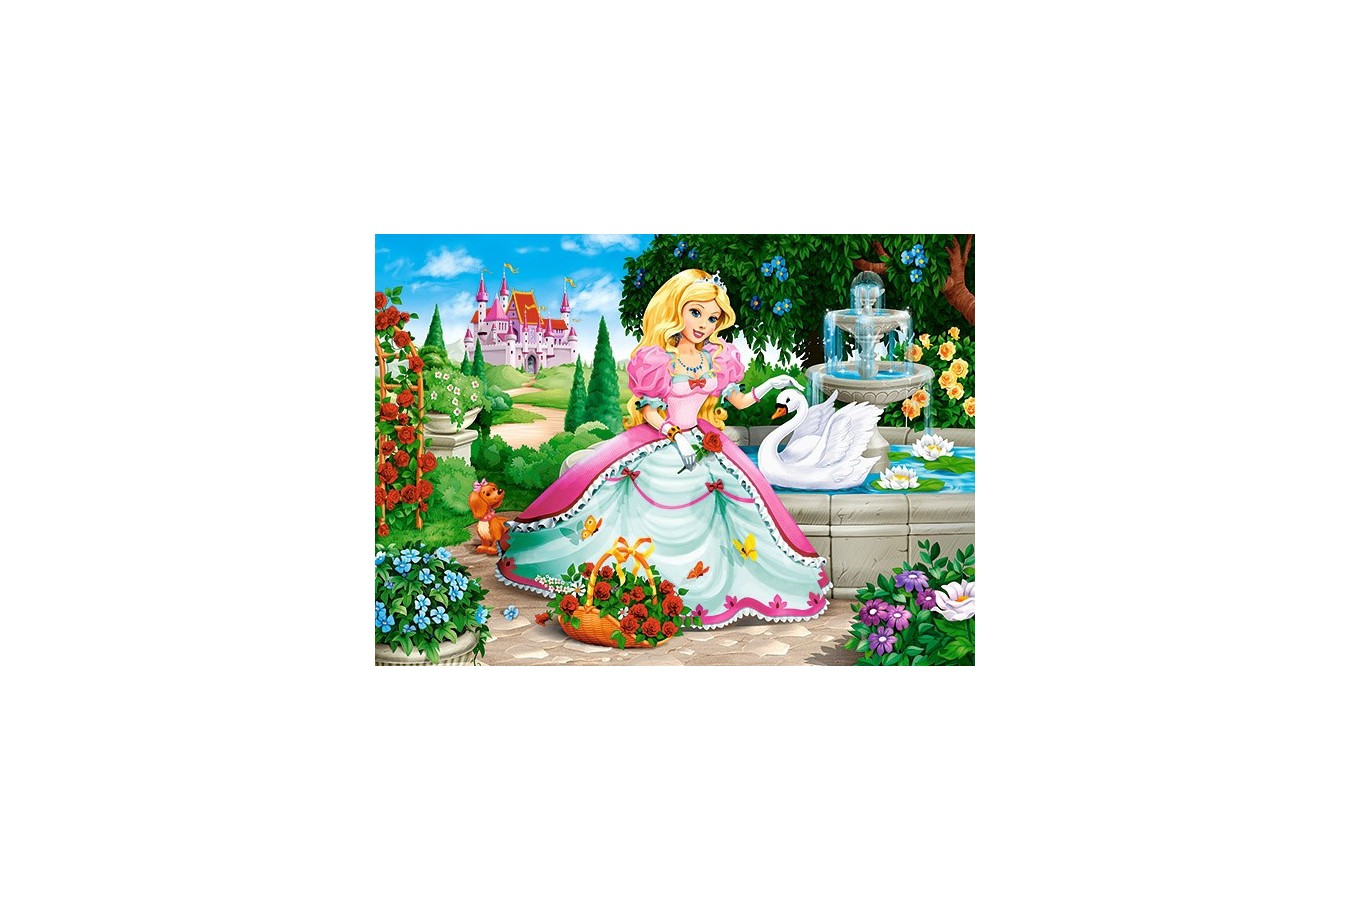 Puzzle Castorland - Princess with Swan, 60 piese